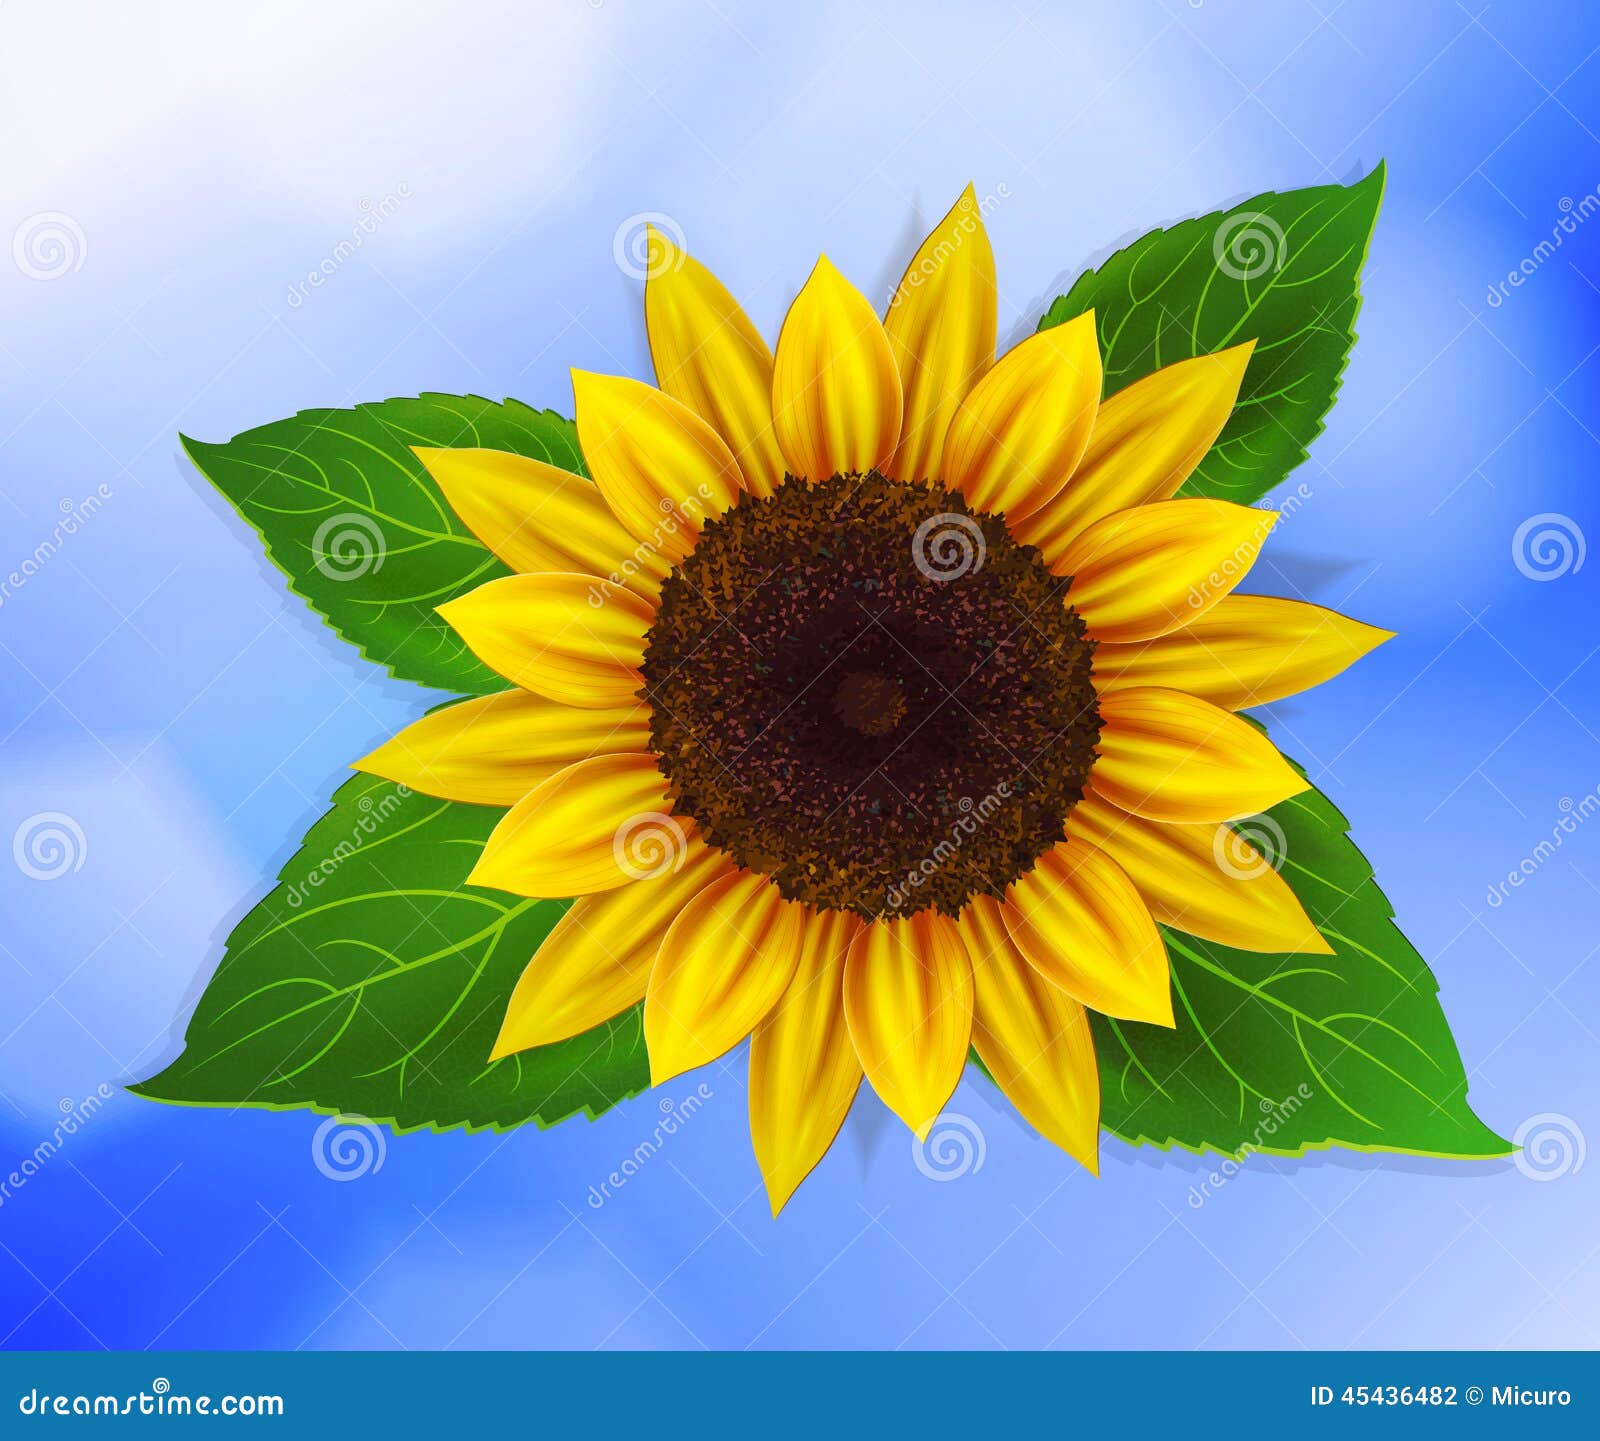 Download Vector Sunflower With Leaves Stock Illustration ...